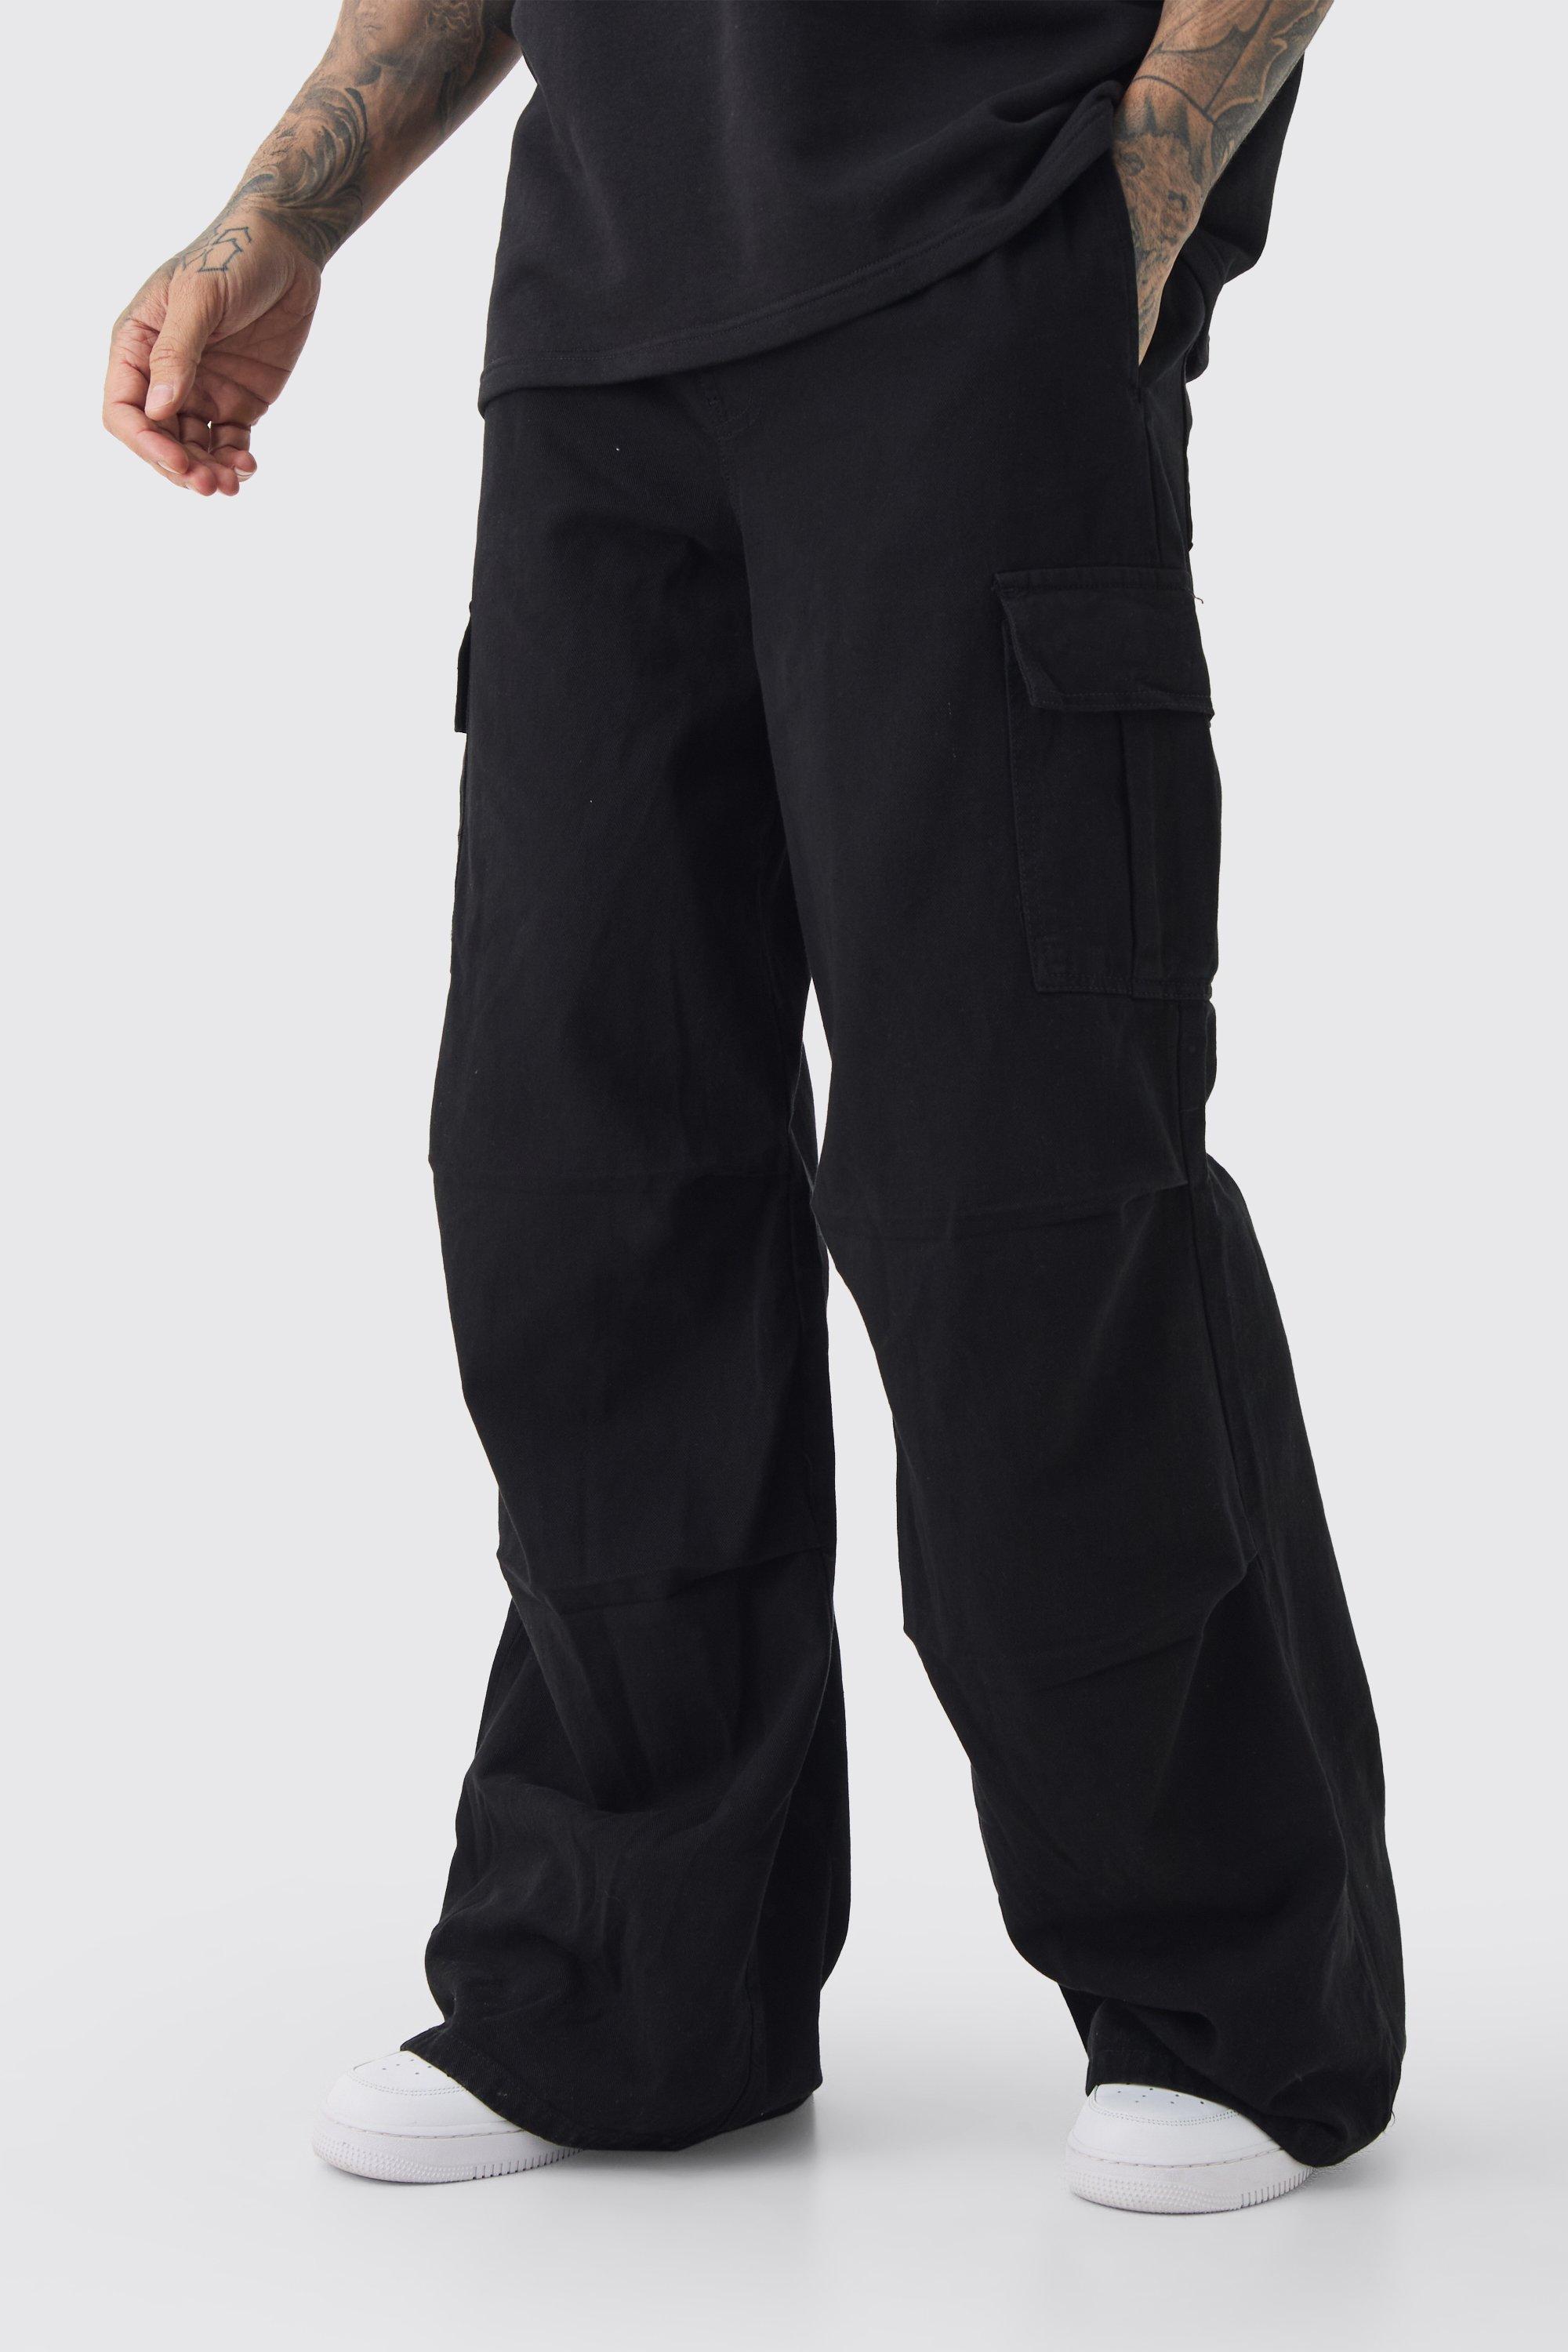 Boohoo Tall Extreme Baggy Fit Cargo Pants In Black, Black